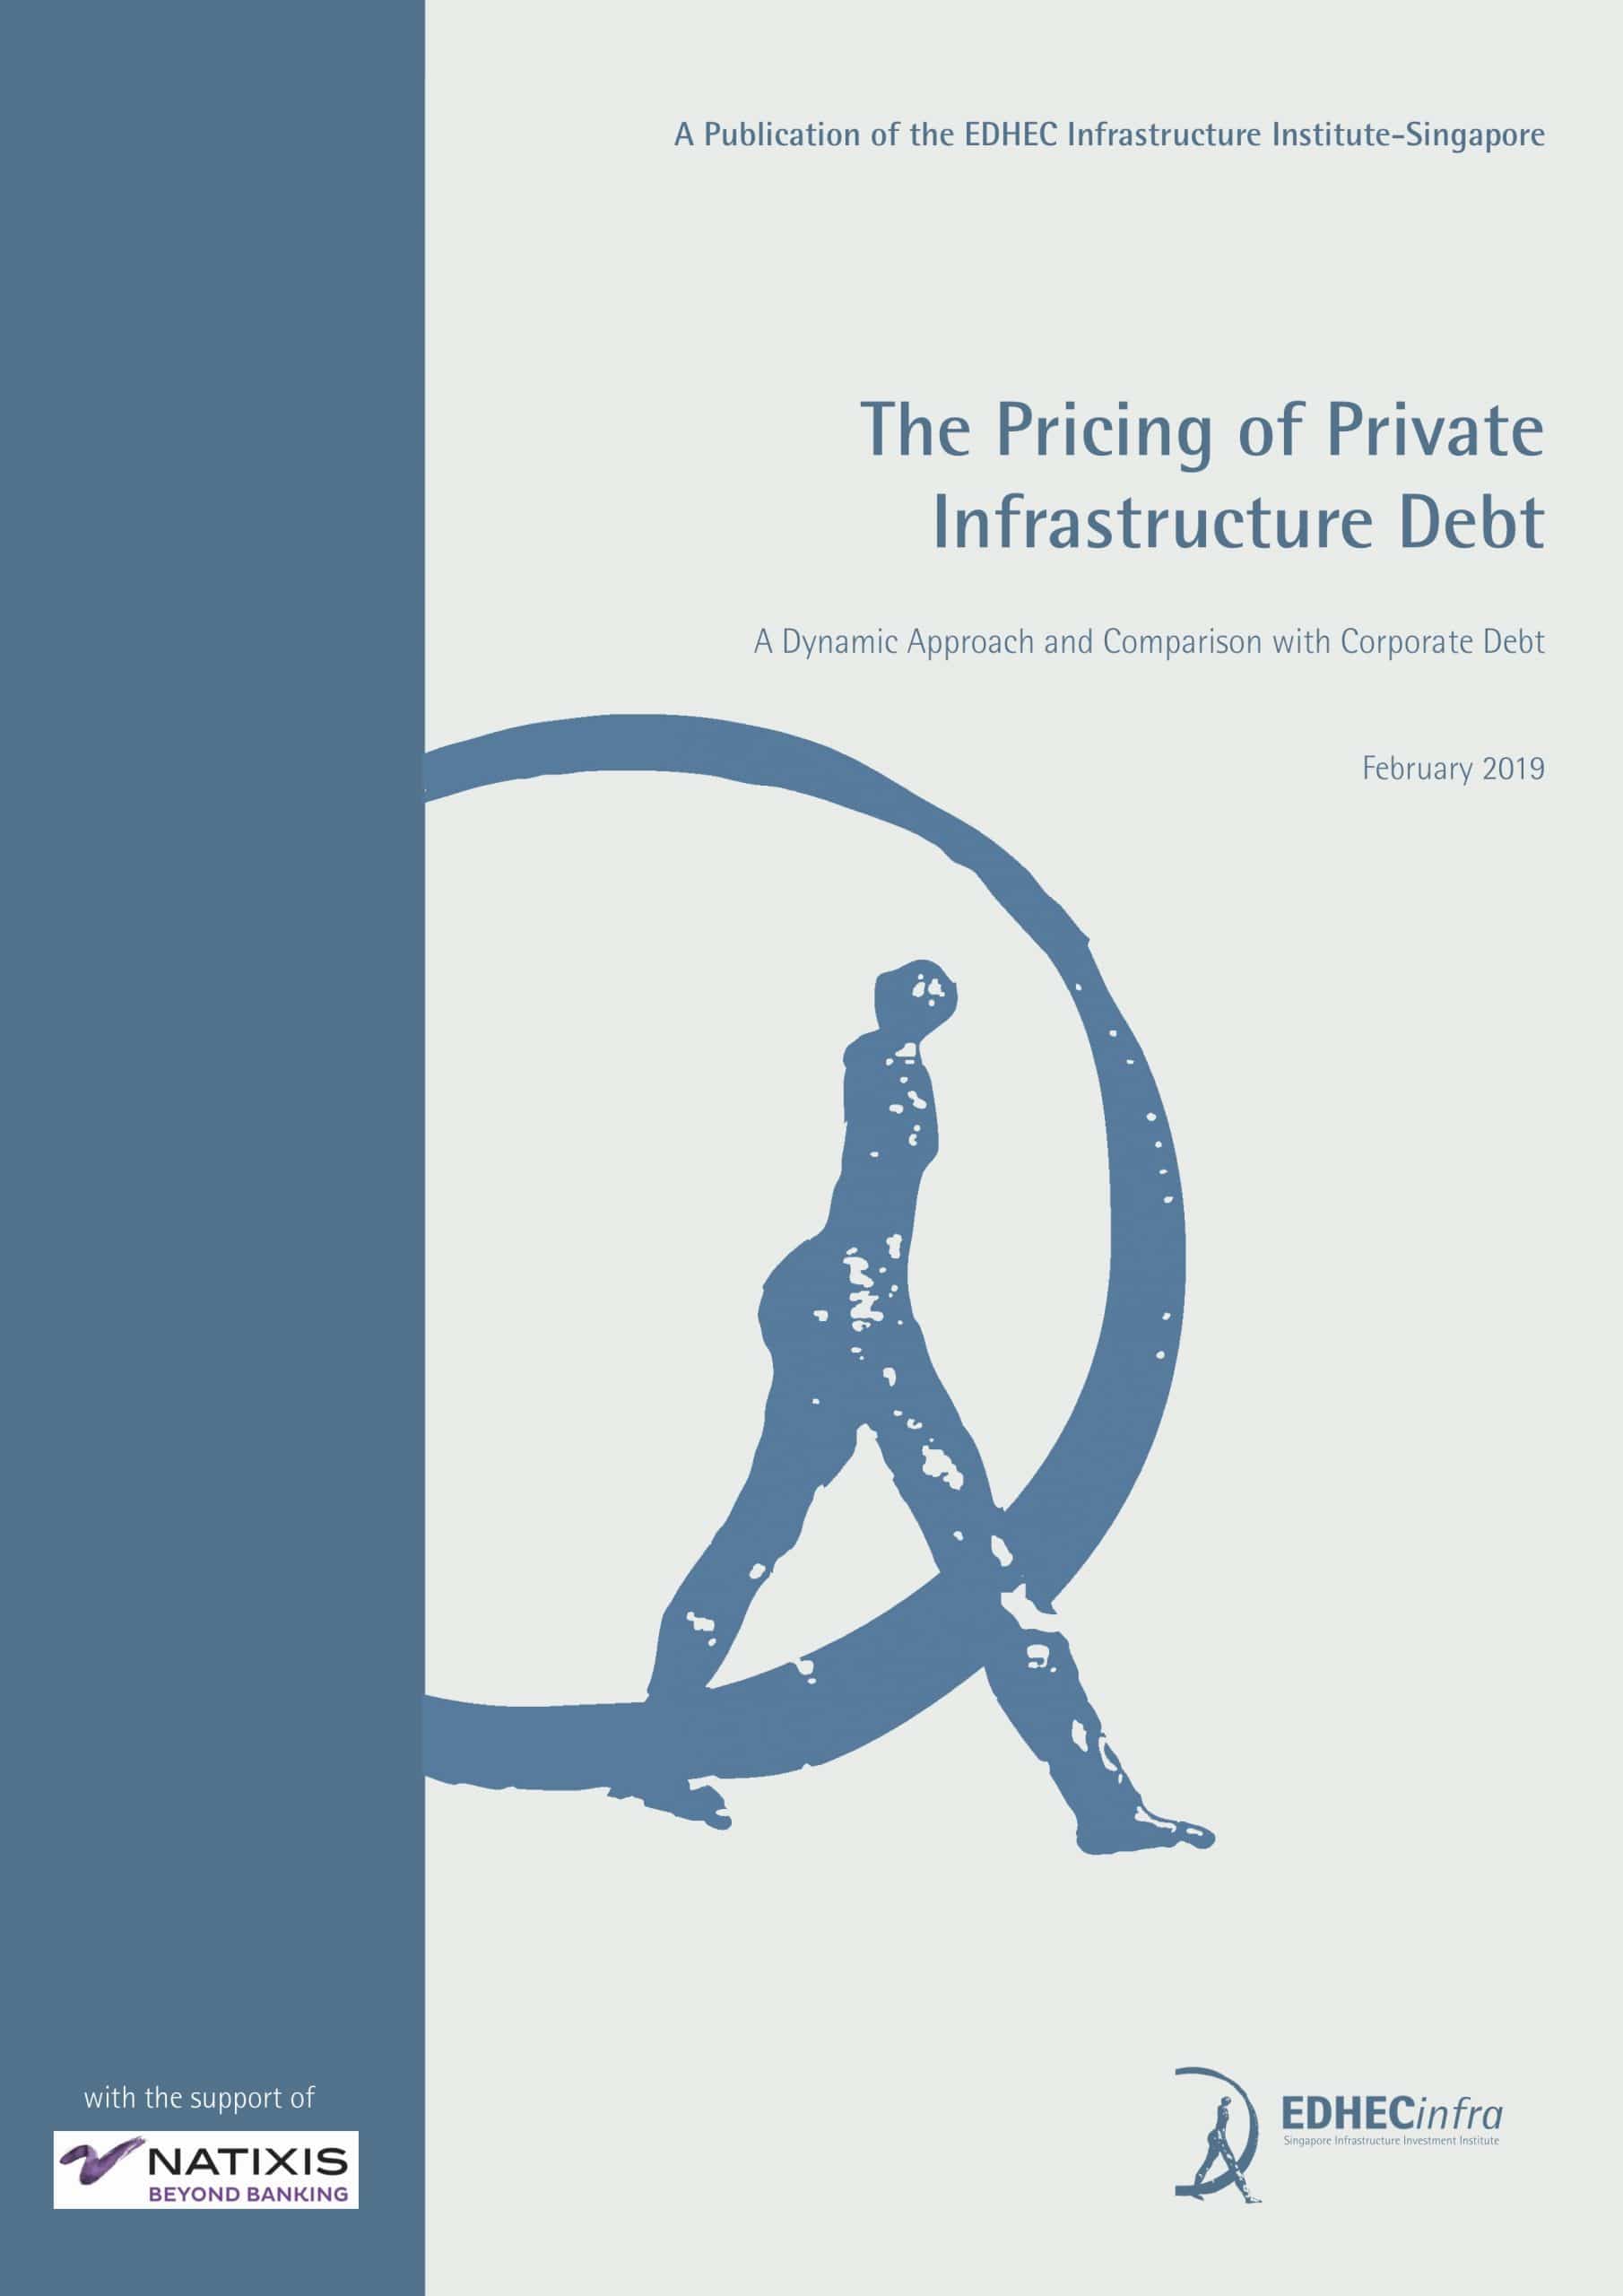 The Pricing of Private Infrastructure Debt – a dynamic approach